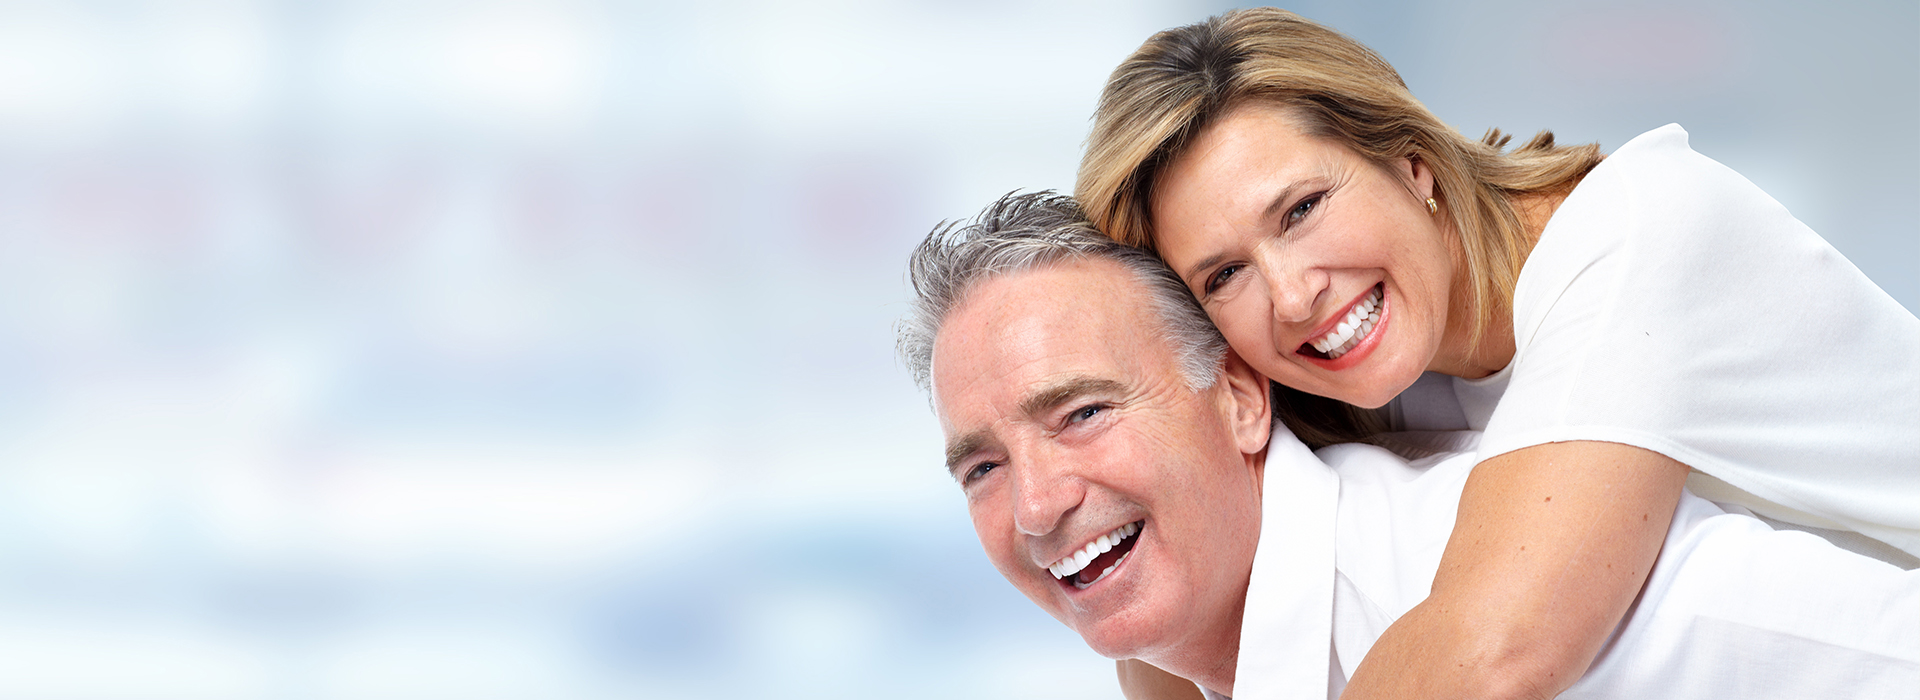 Almaden Valley Smile Design | Full Mouth Reconstruction, Root Canals and Veneers